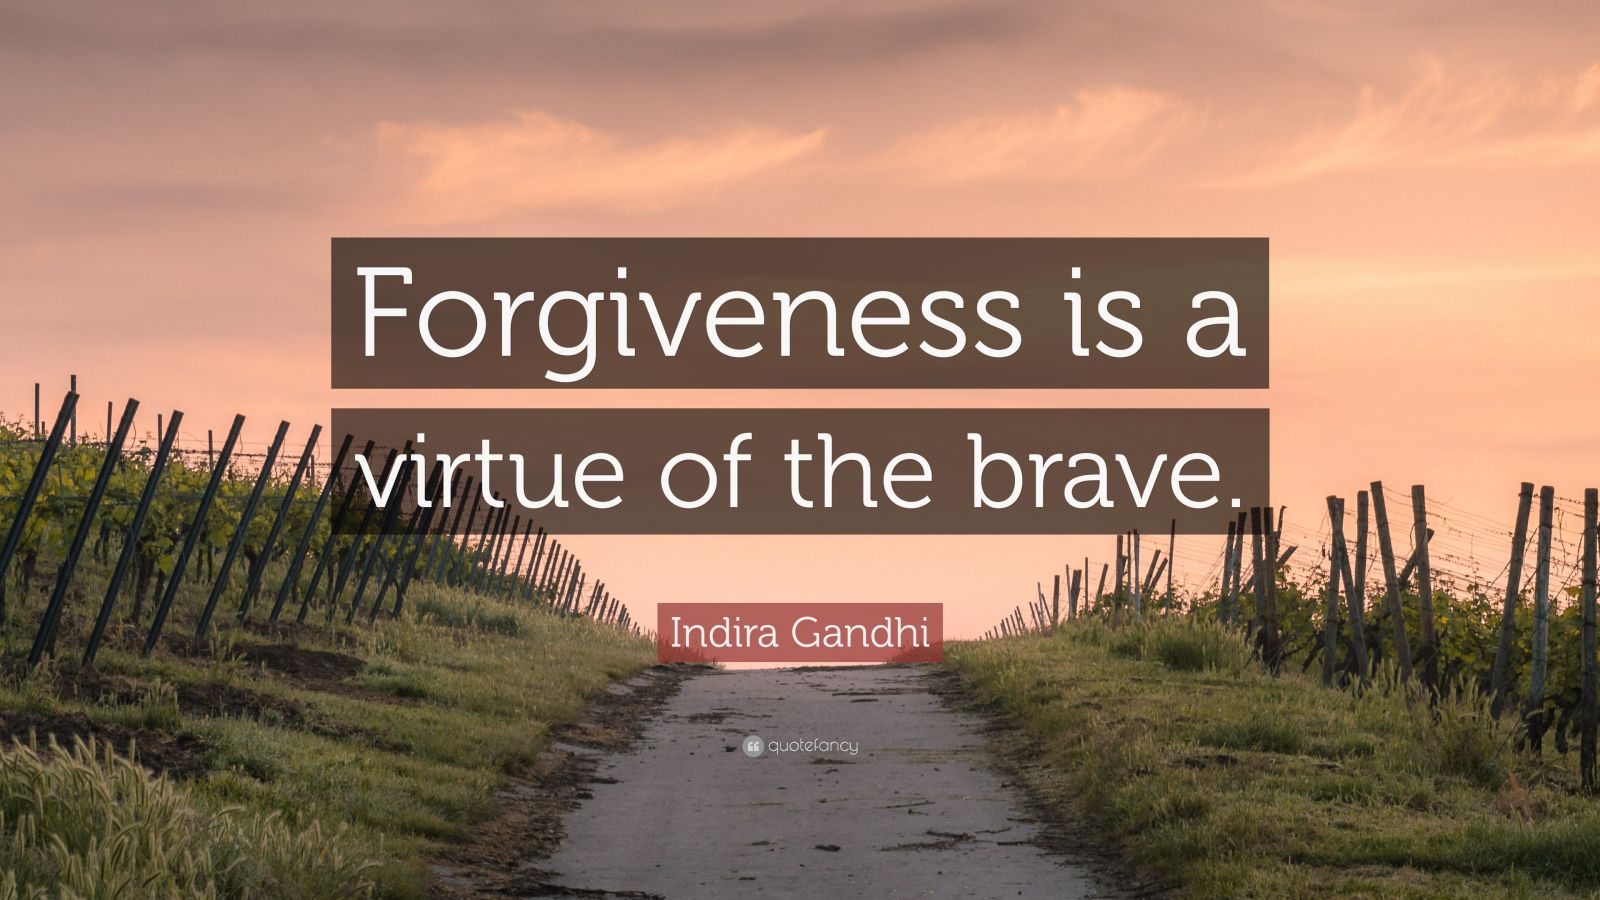 forgiveness is the virtue of the brave meaning